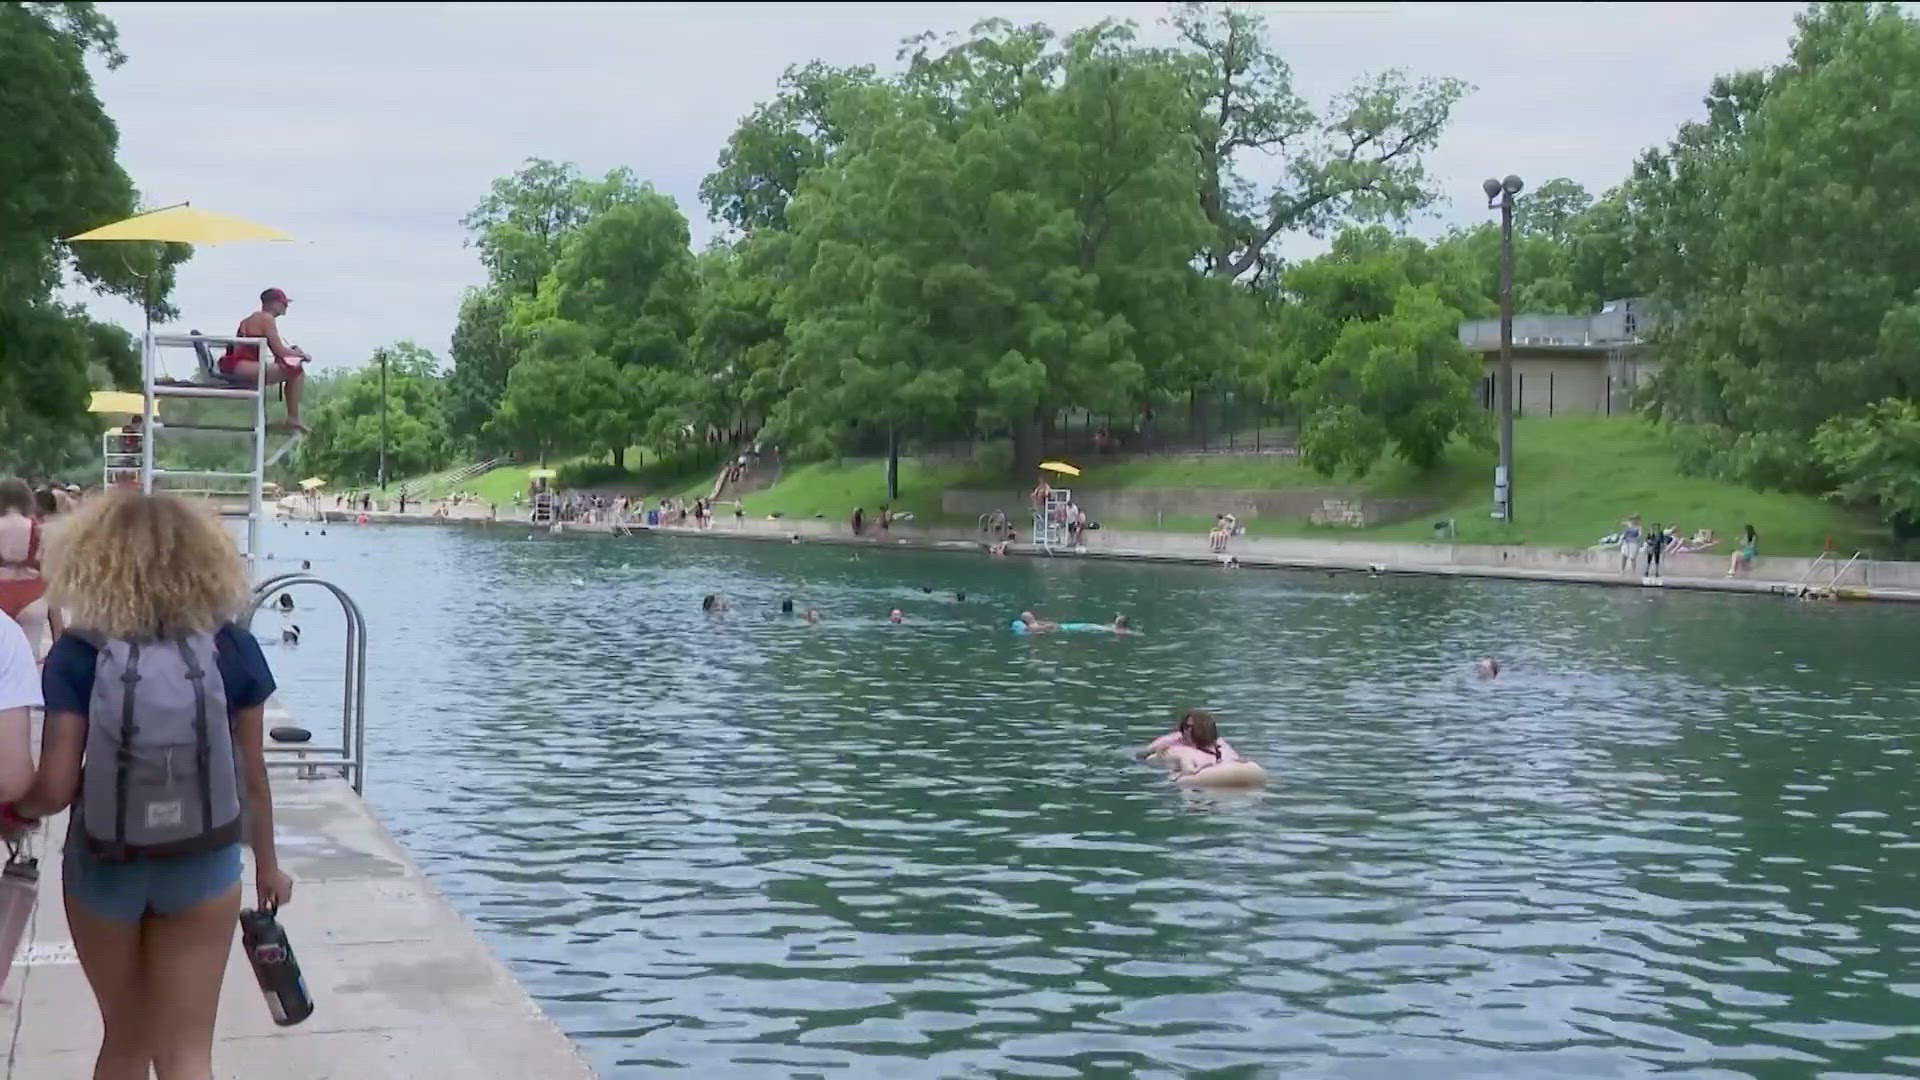 Officials are urging safety as water attractions will be busy during the summer.